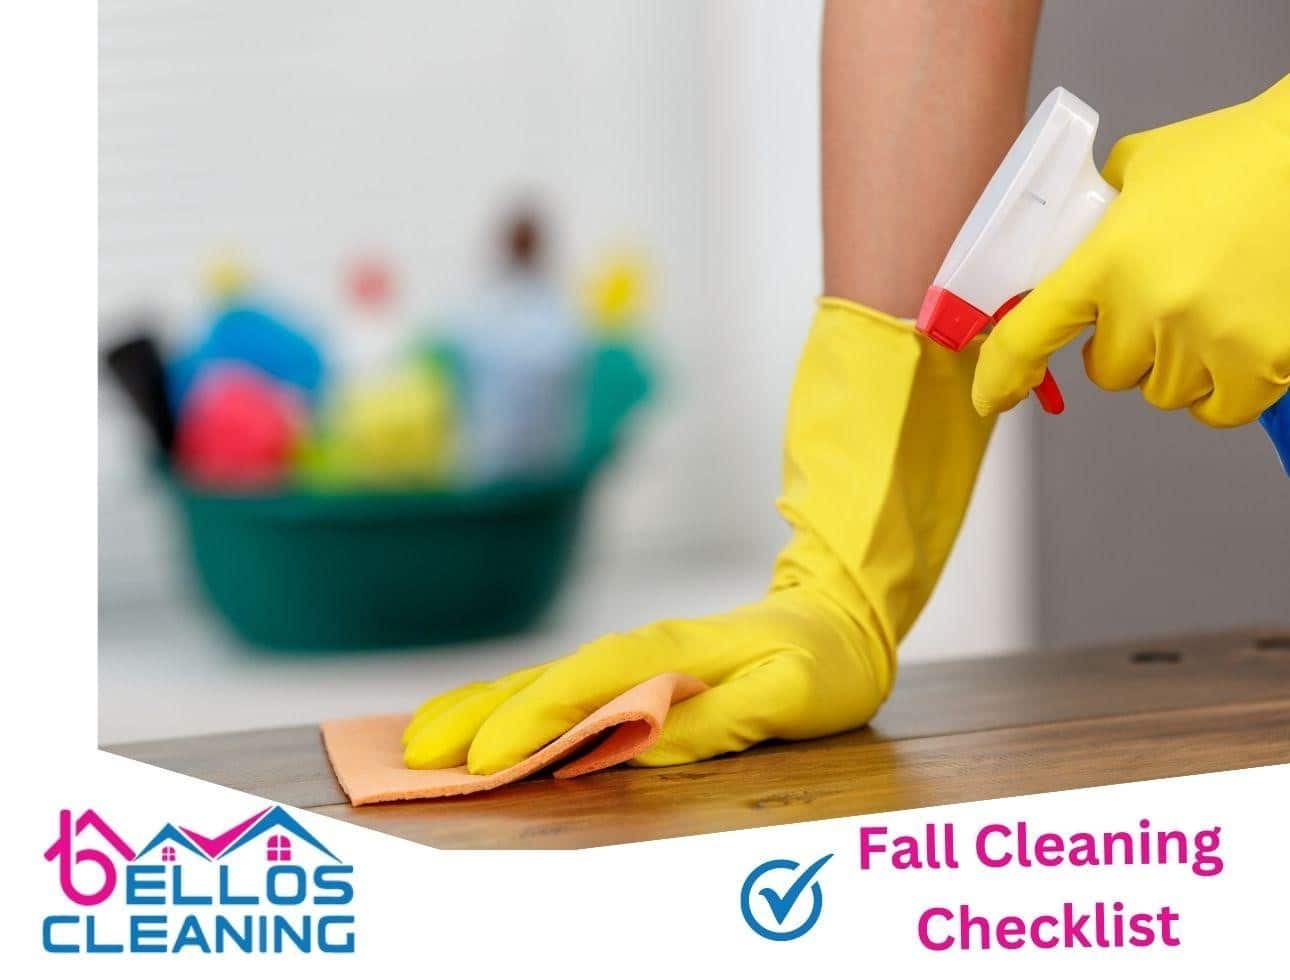 Essential Fall Cleaning Checklist: Get Ready for the Change of Seasons